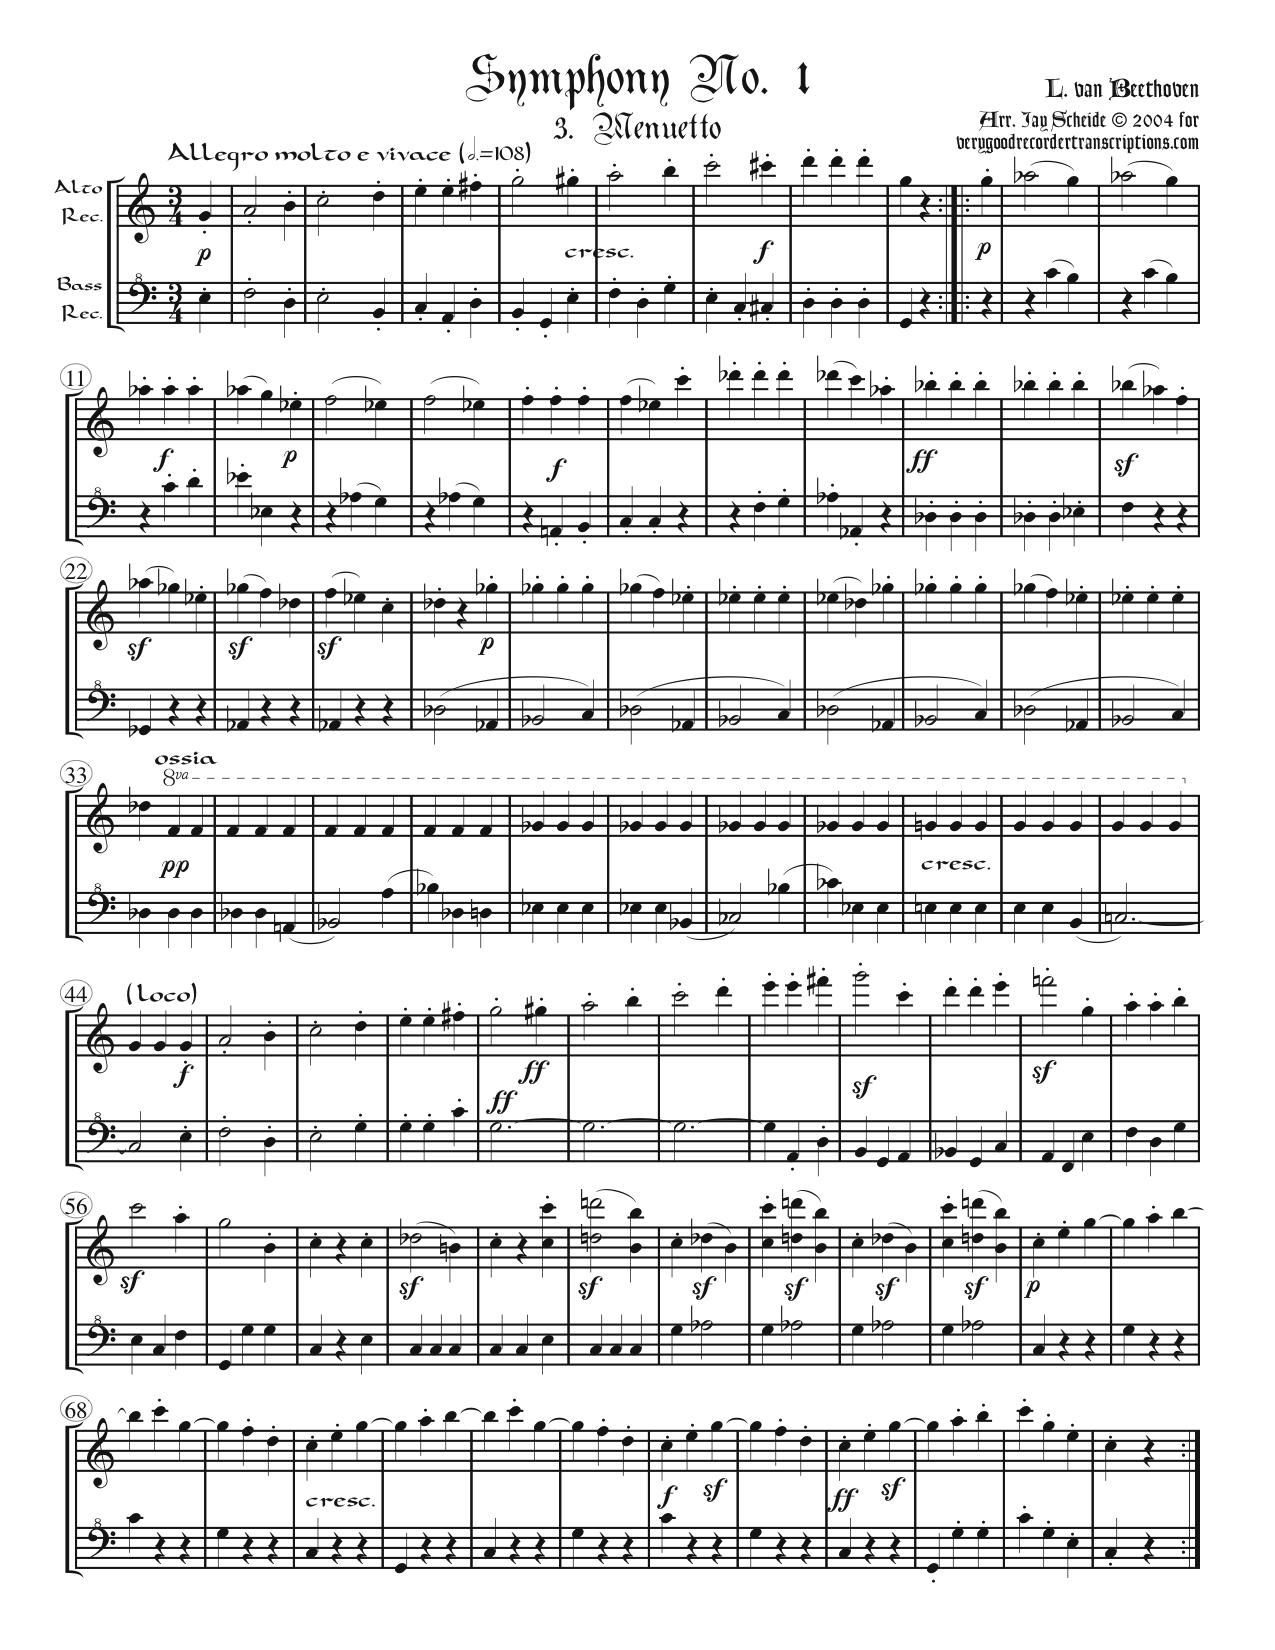 Menuetto from Symphony No. 1, arr. for alto & bass recorders